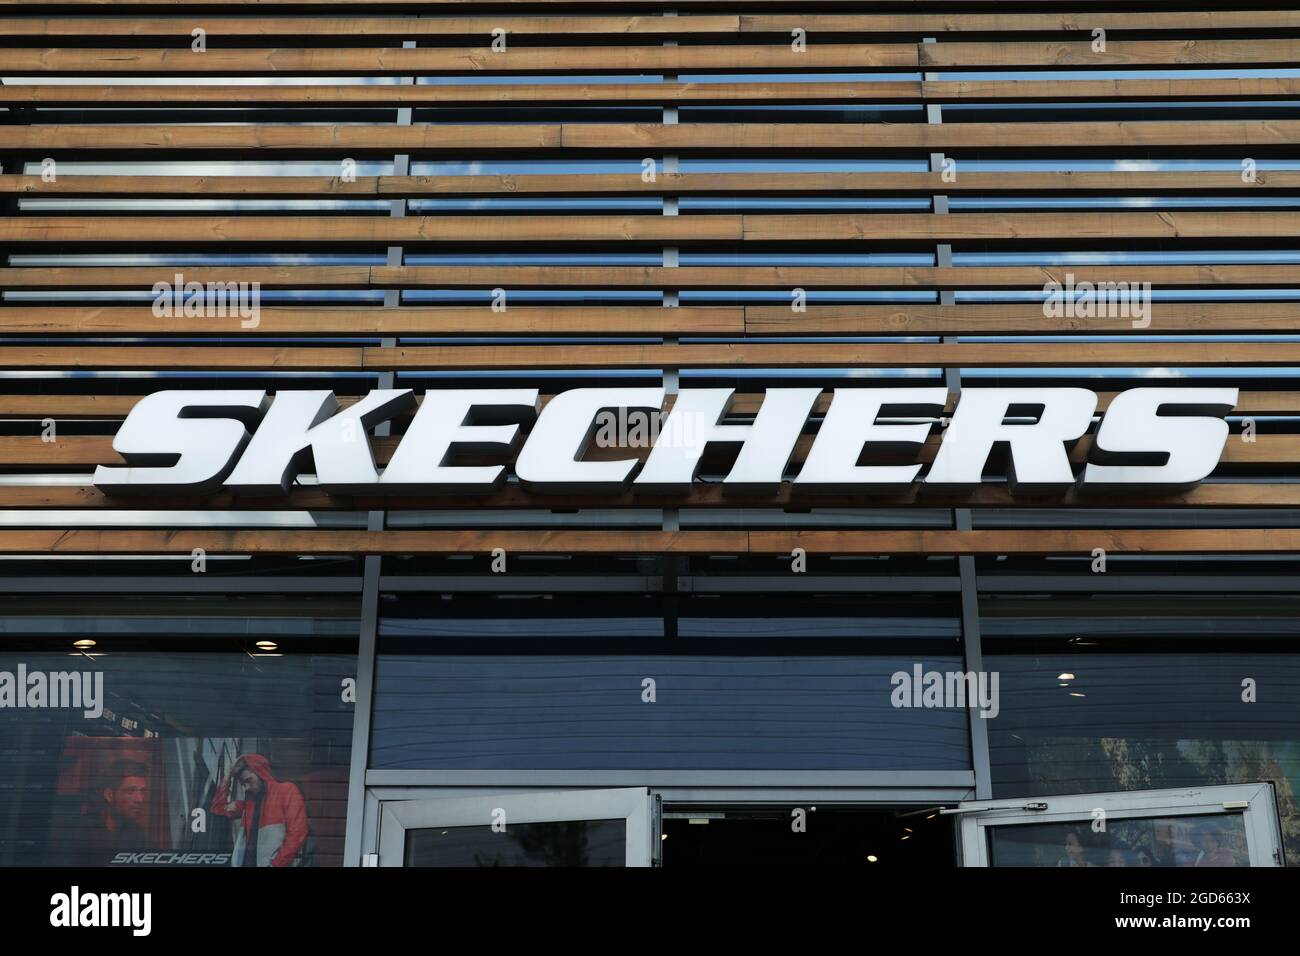 Skechers signs at Hede Fashion Outlet Stock Photo - Alamy